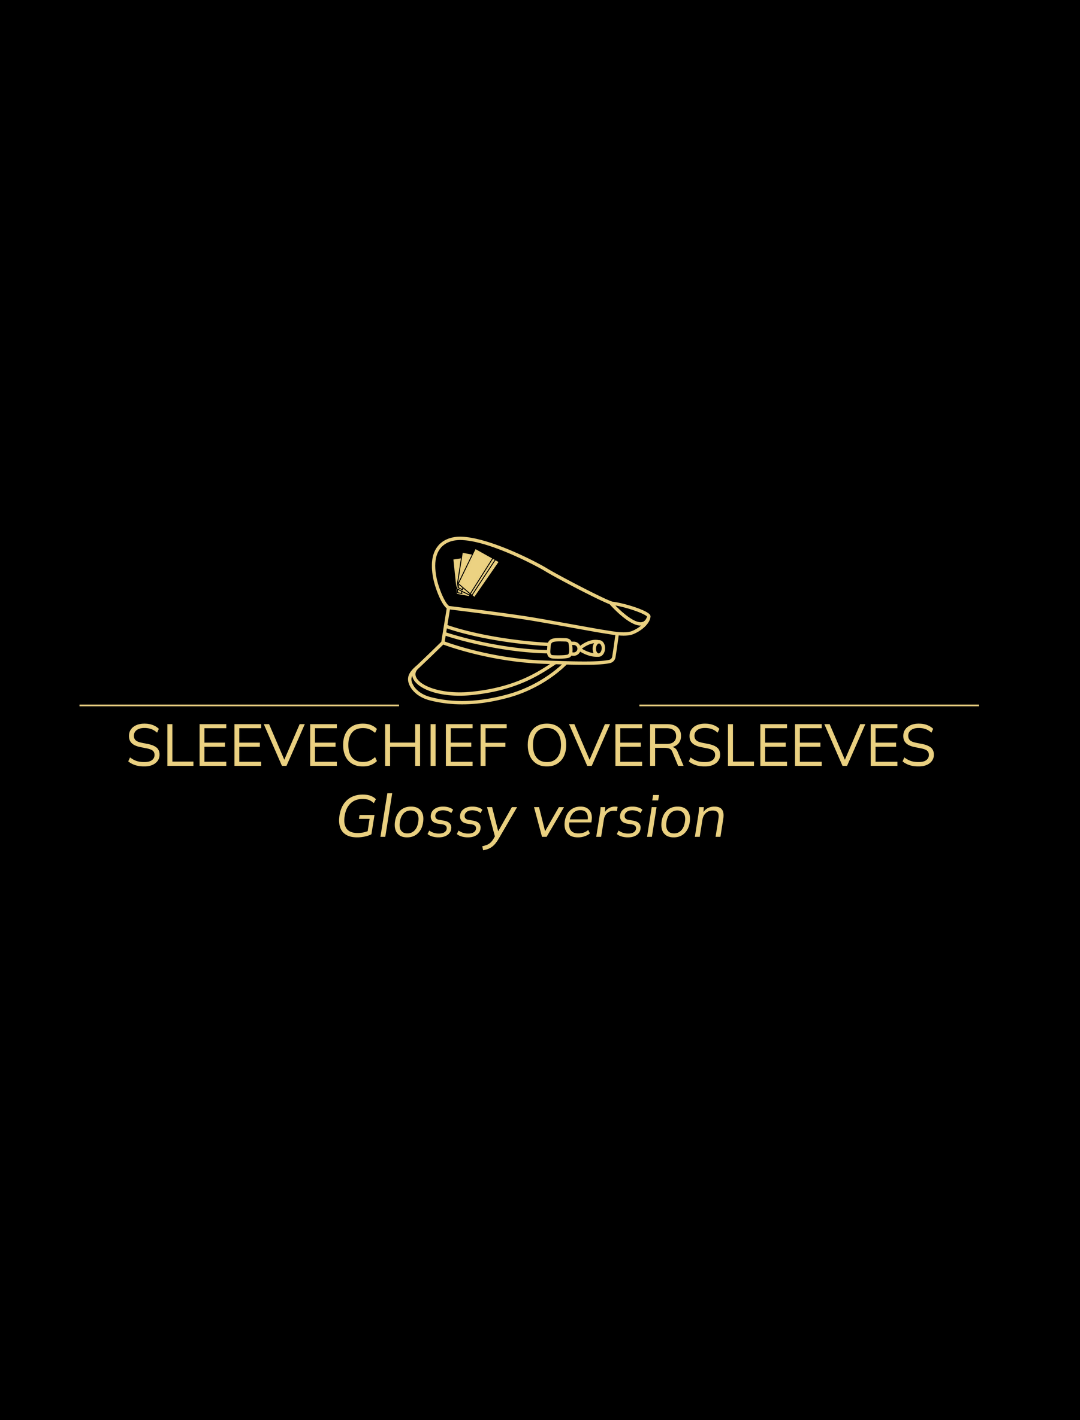 ELITE SERIES - Glossy Over Sleeves (70 PCS) - sleevechief